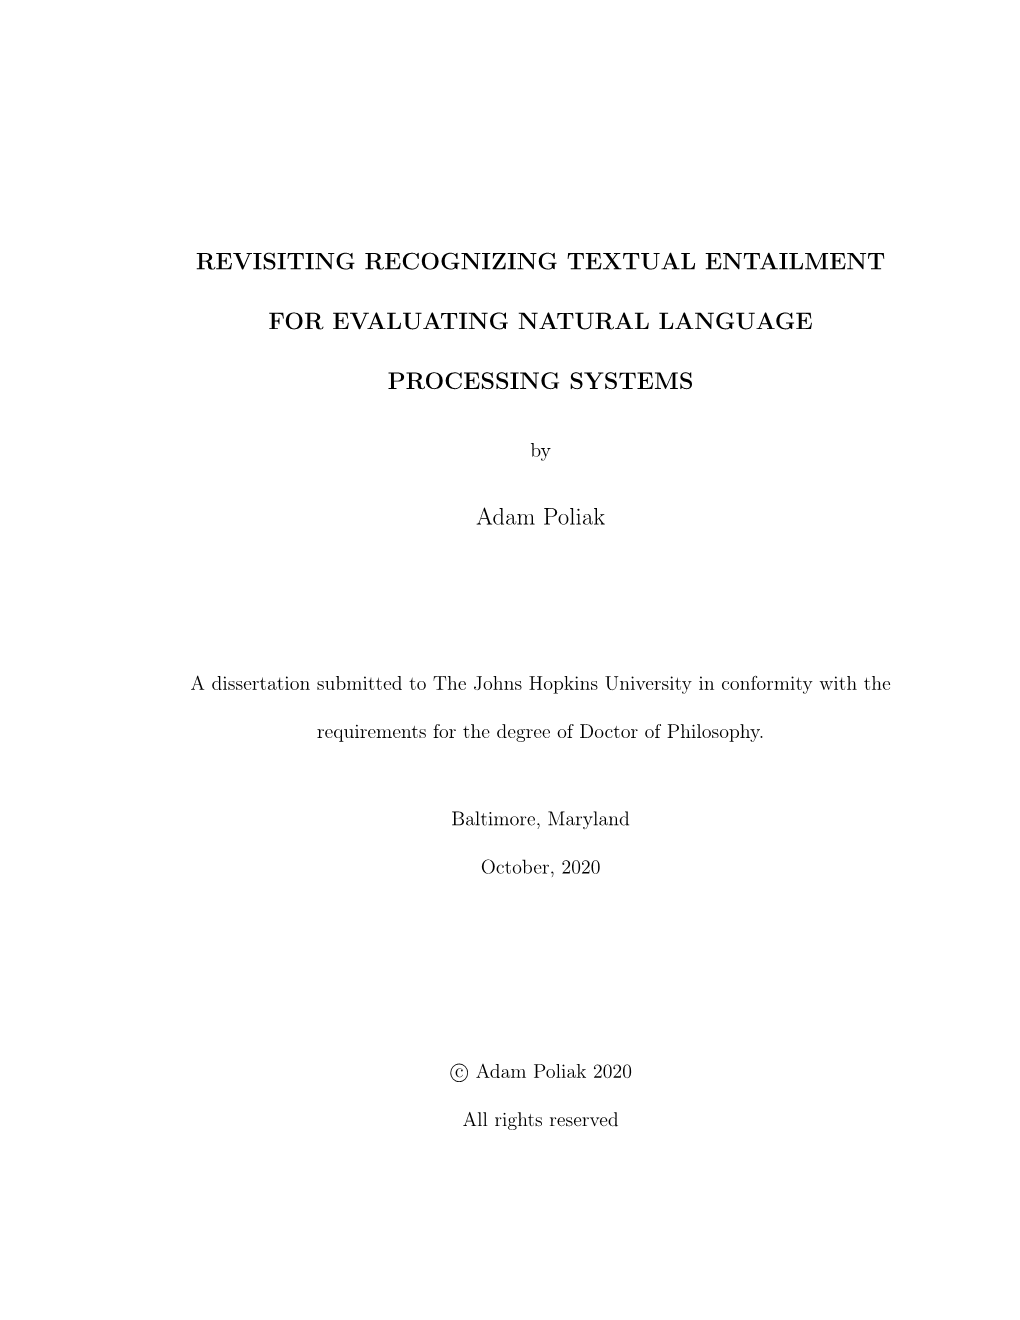 Revisiting Recognizing Textual Entailment for Evaluating Natural